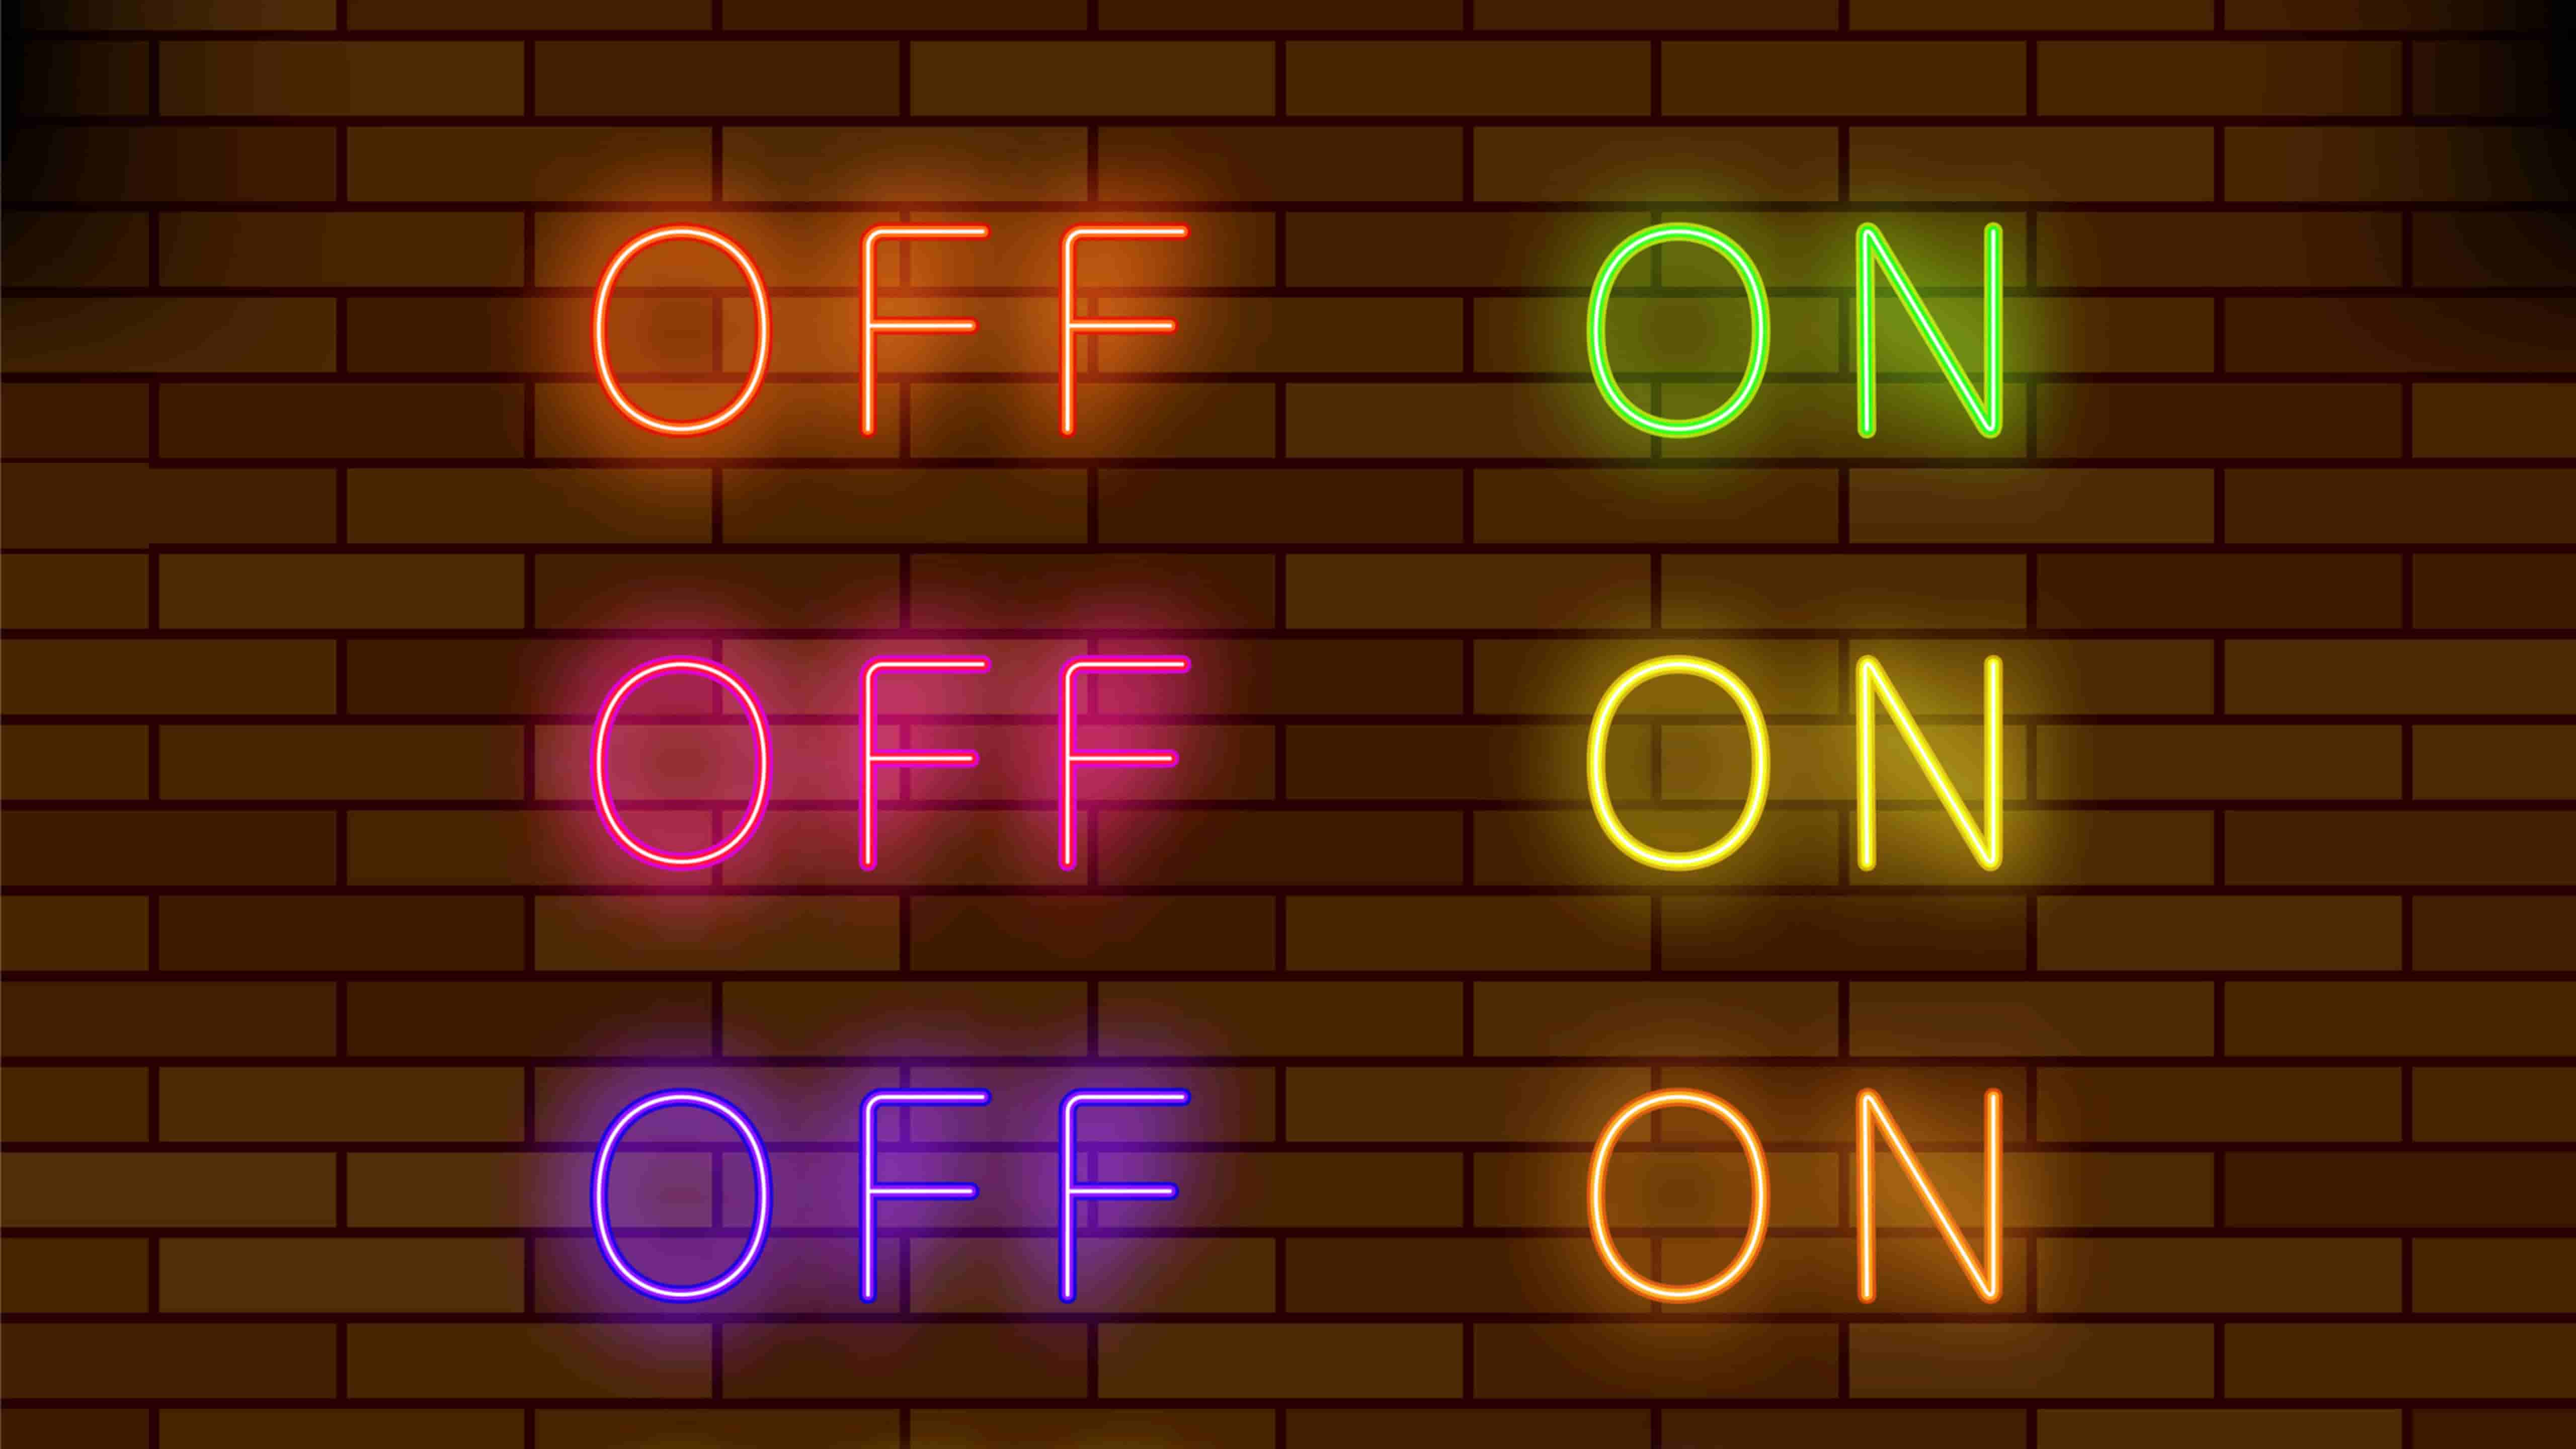 Iconic neon signs from around the world and their cultural significance